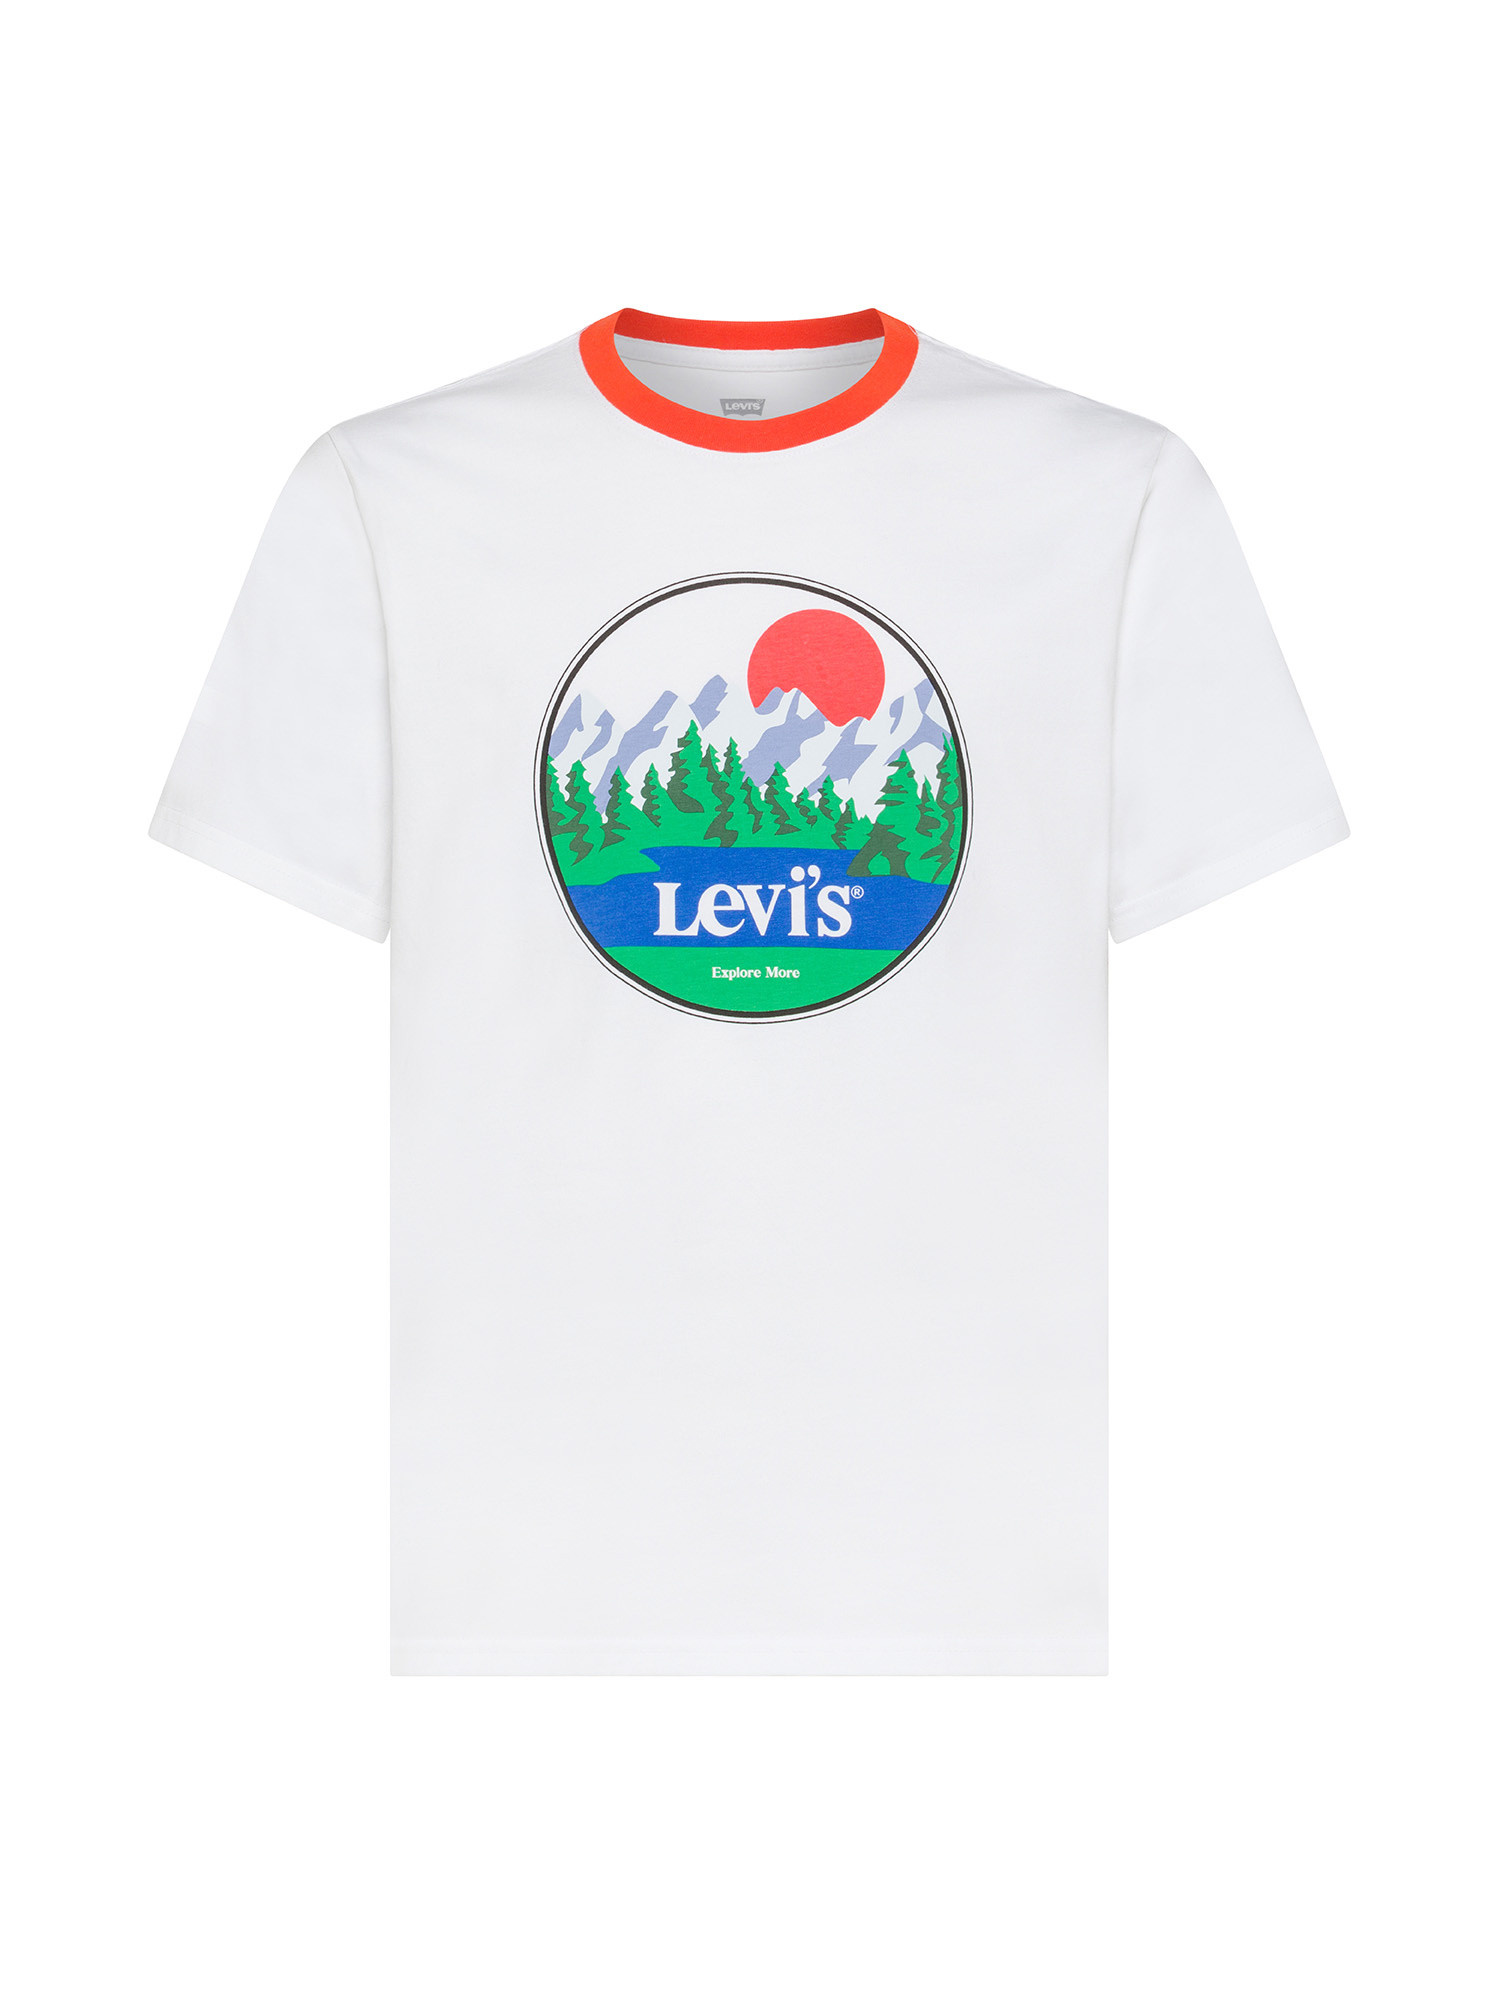 Levi's - T-shirt con stampa, Bianco, large image number 0